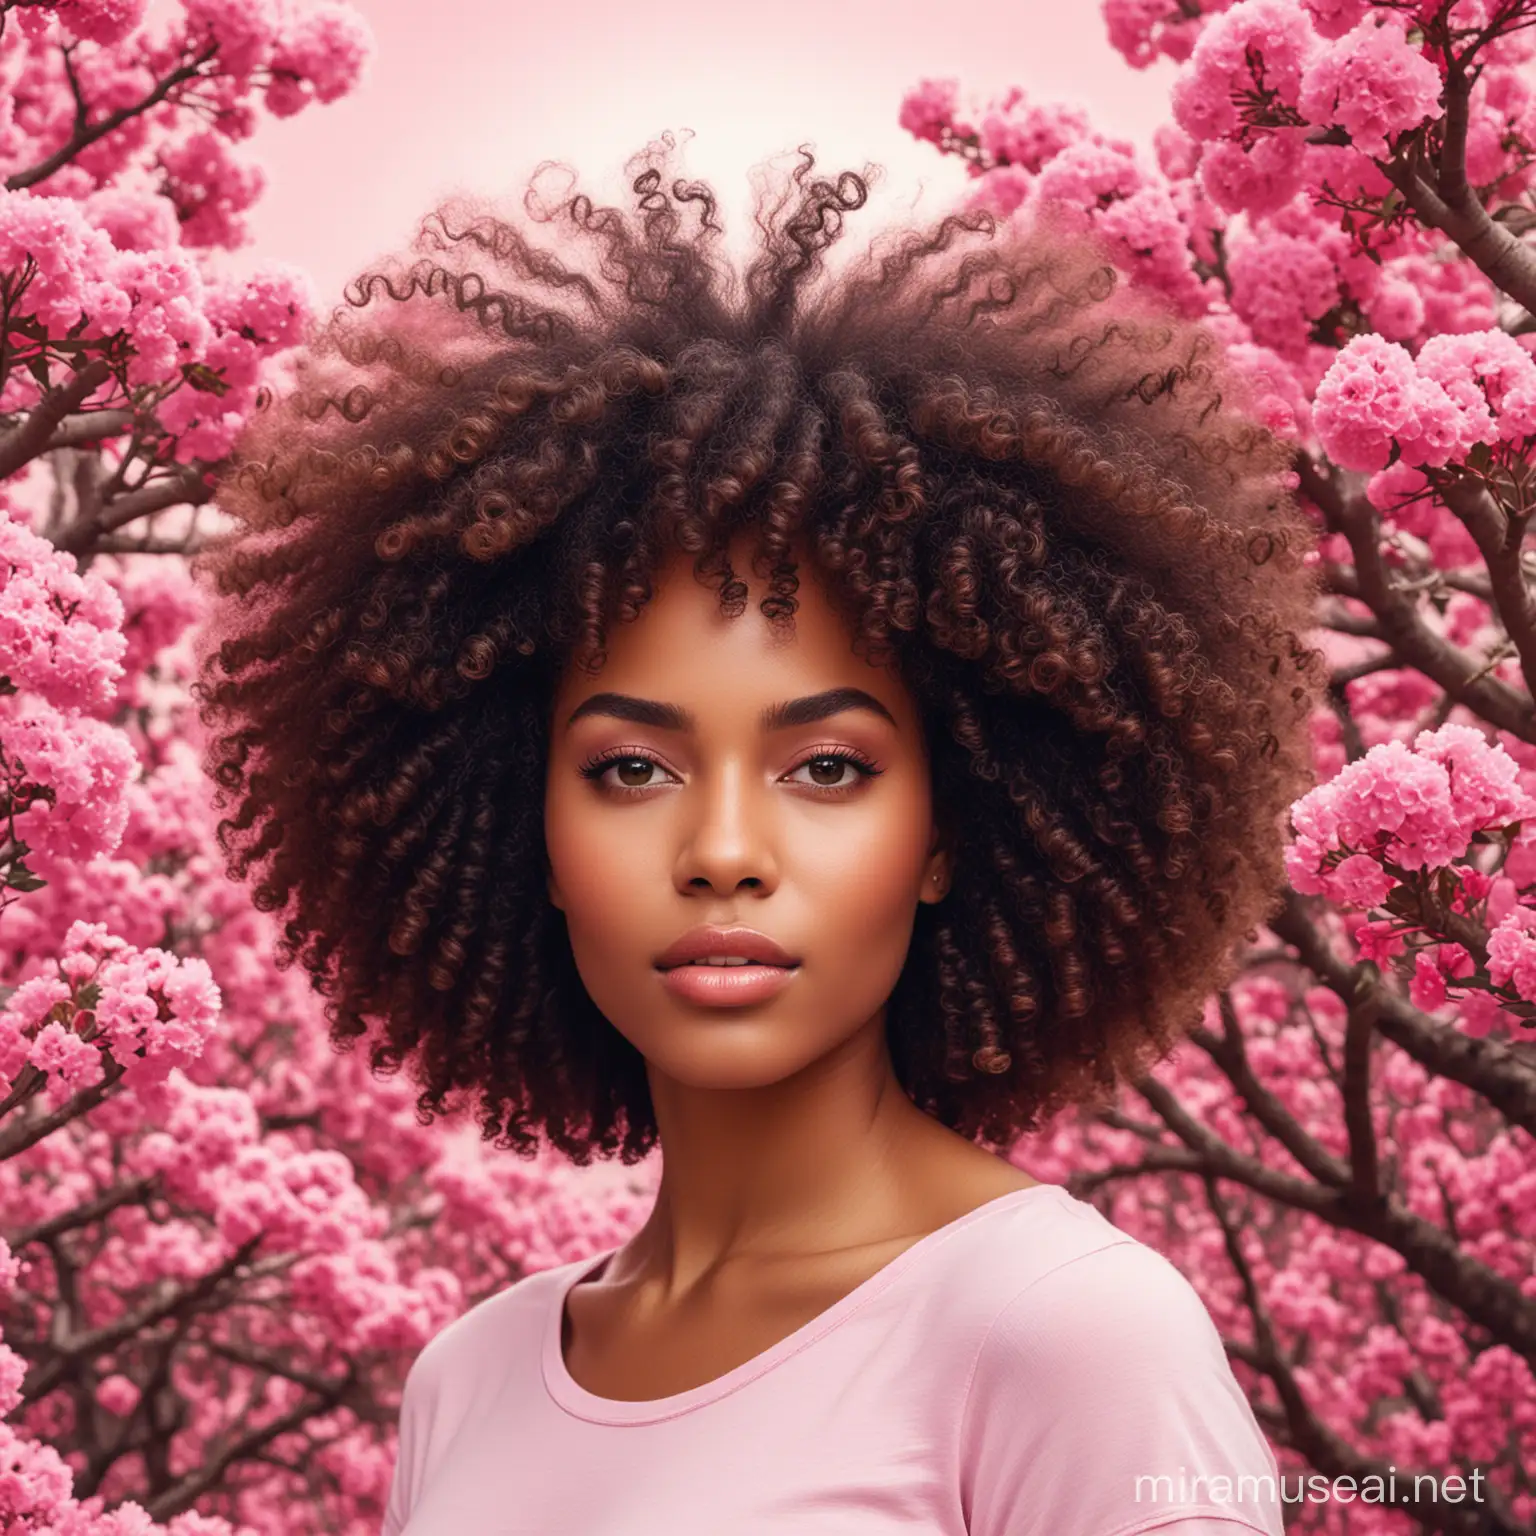 gorgeous black woman with large, curly afro. surrounded by pink nature. Living in a girls world. 